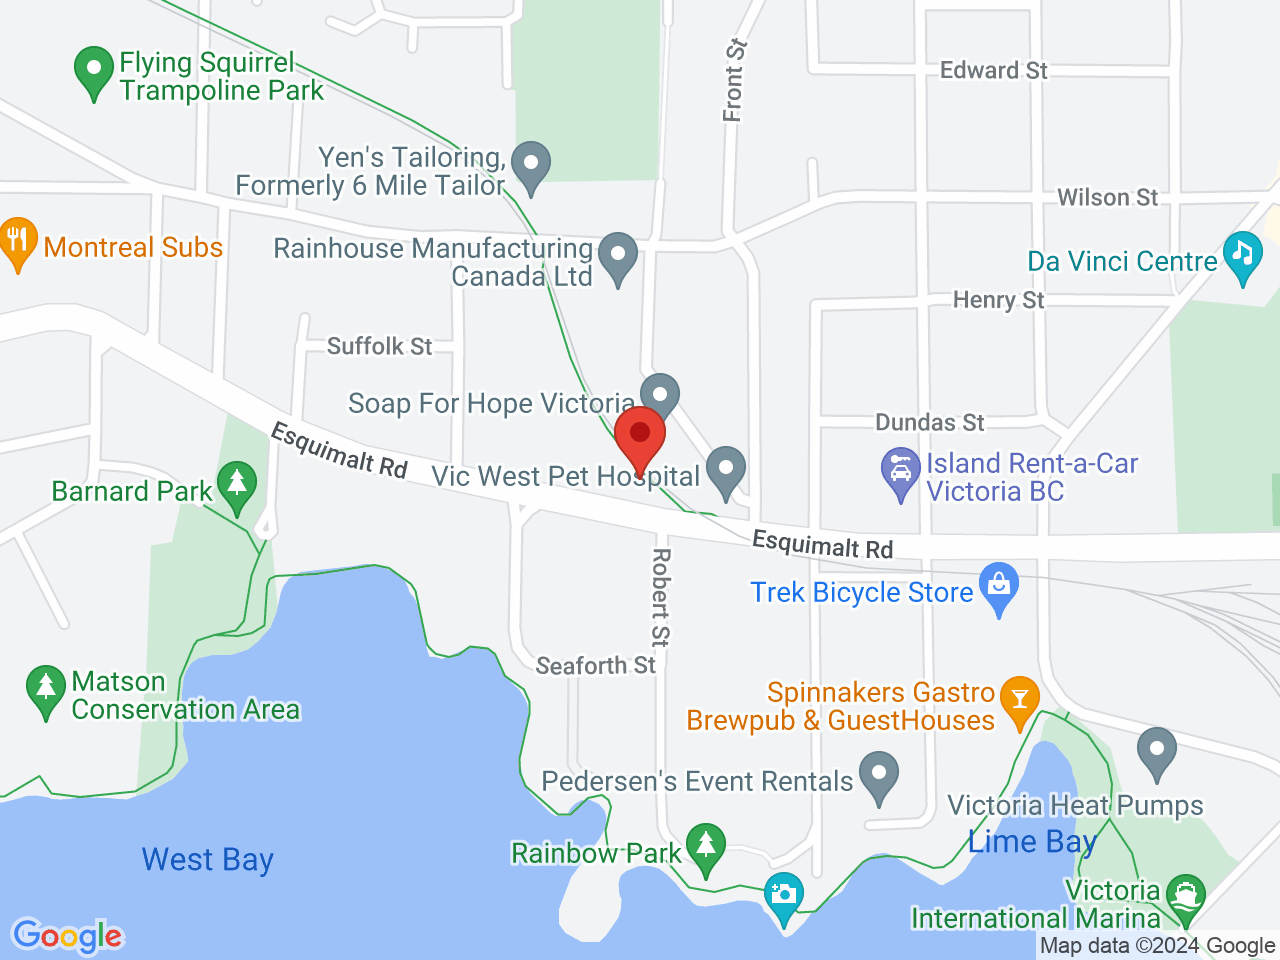 Street map for Pineapple Express, 608 Esquimalt Rd., Victoria BC